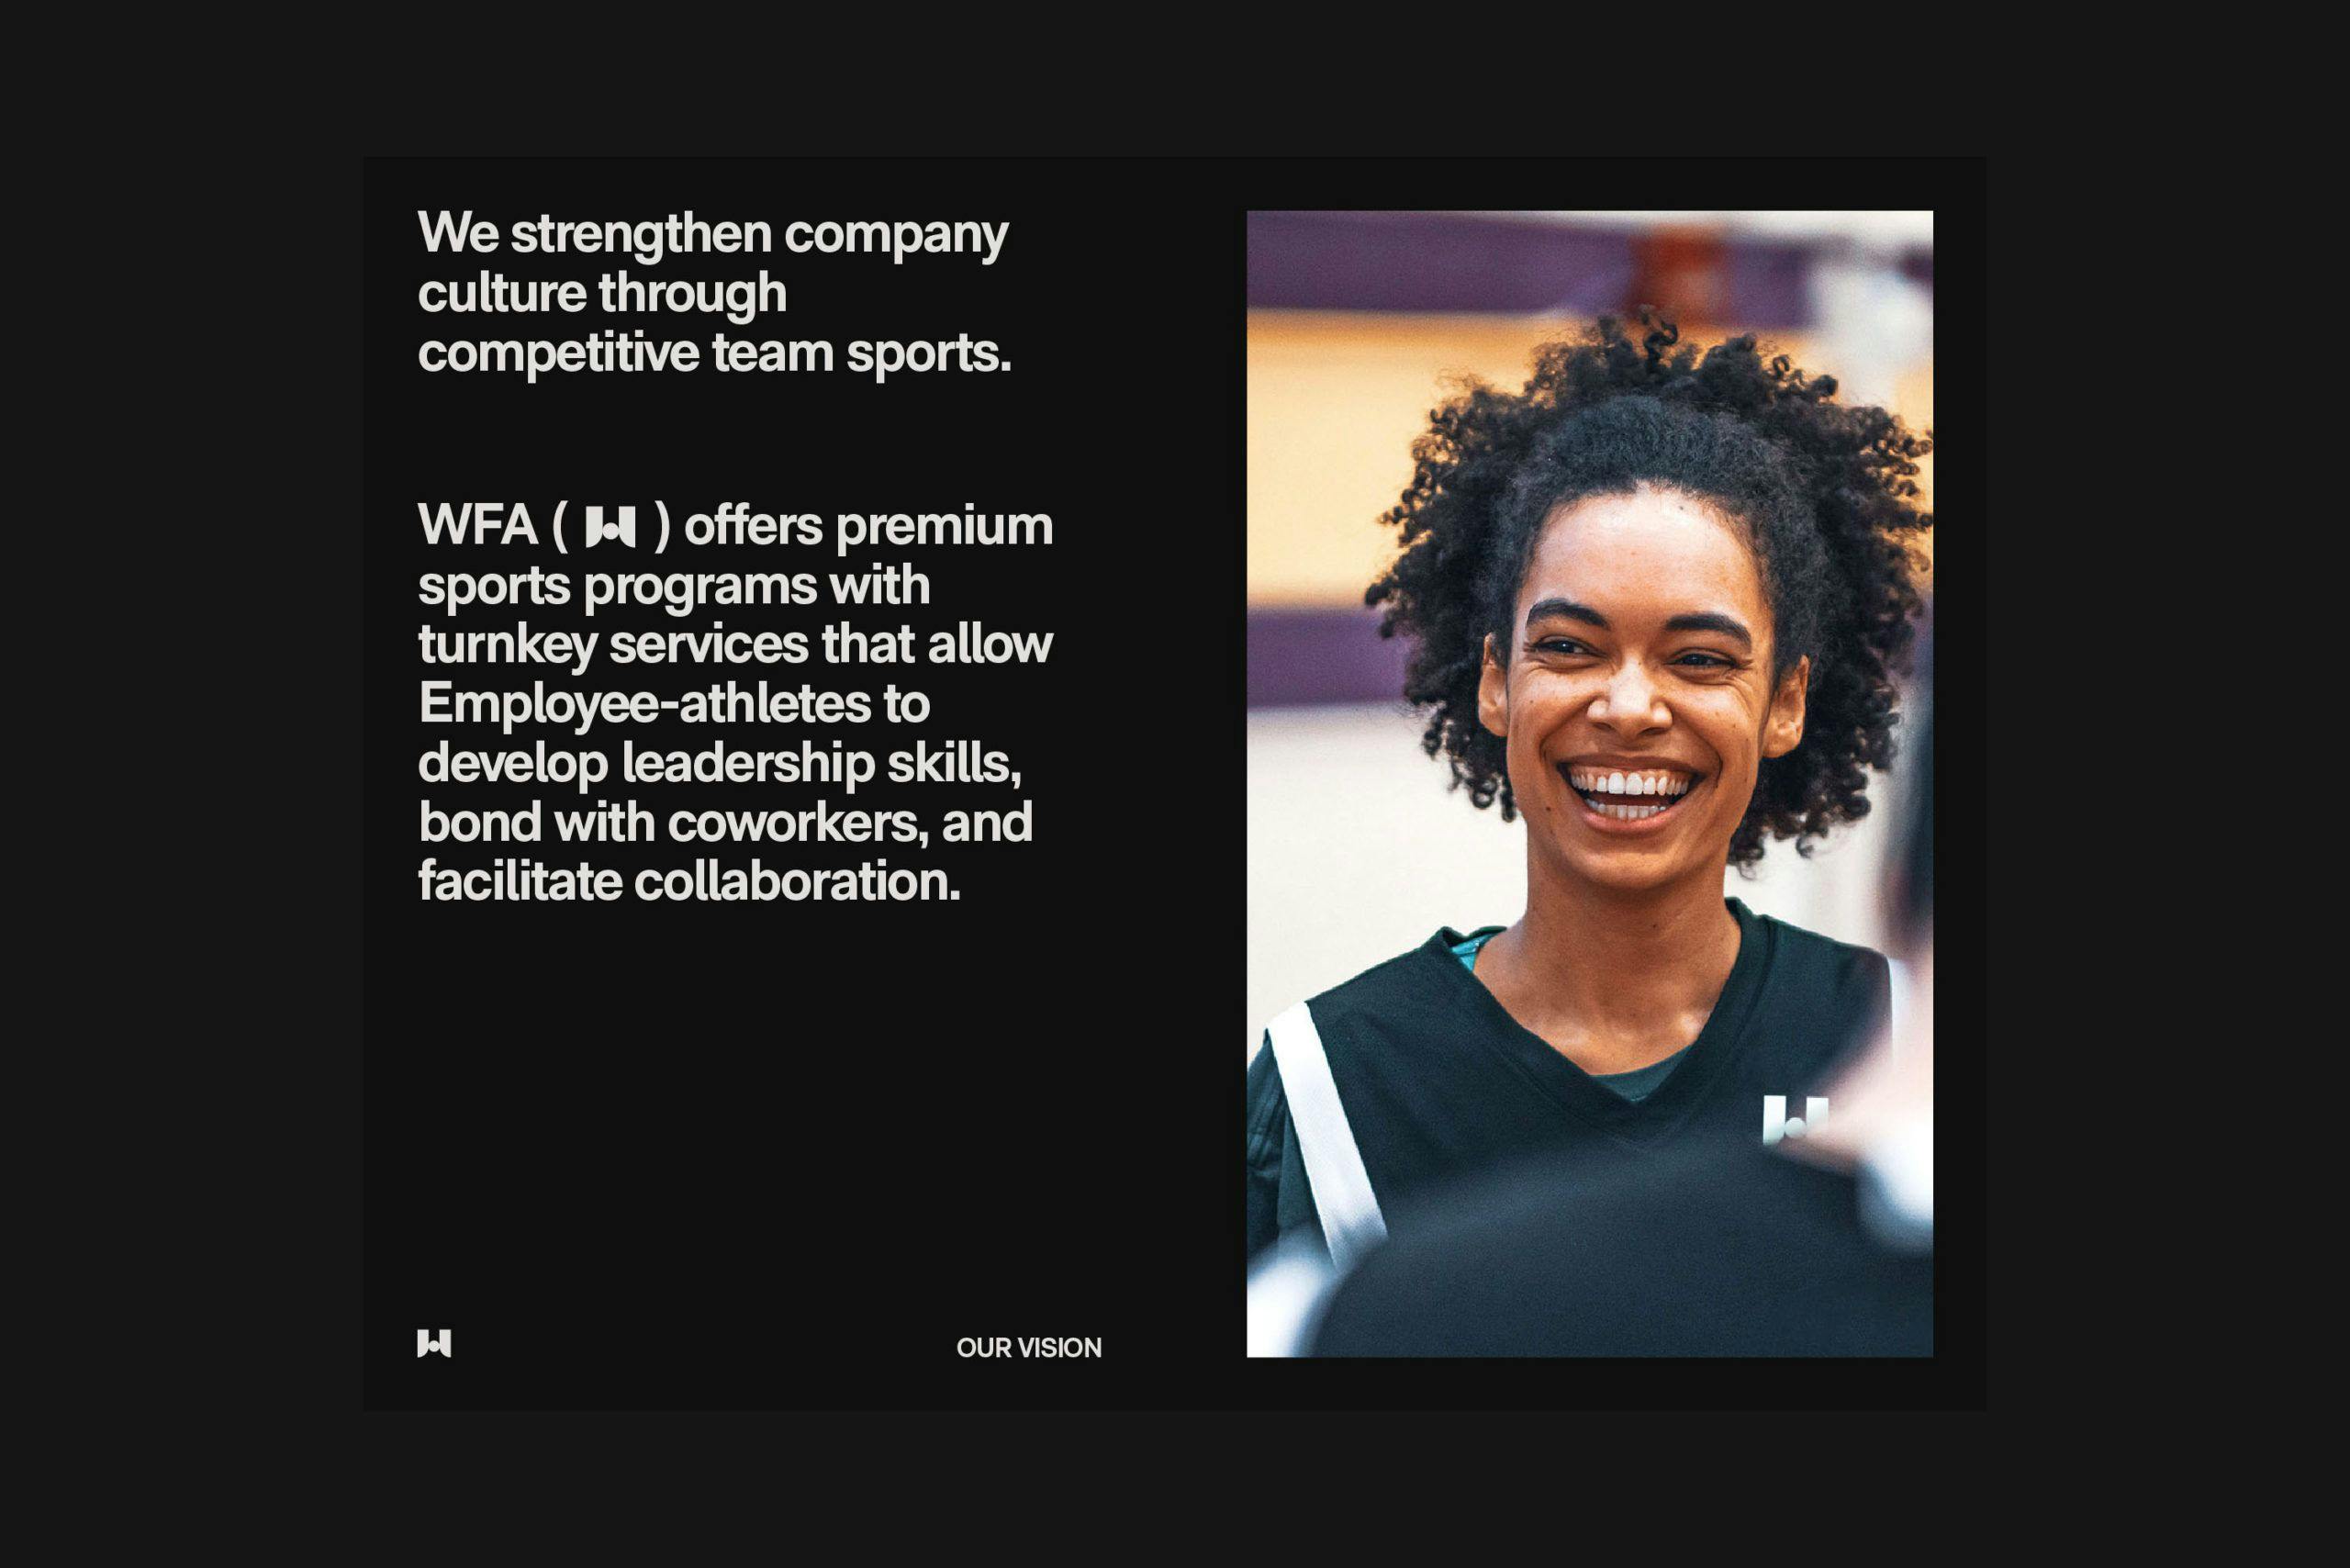 Photo of a basketball player smiling next to a statement mentioning the goal of WFA